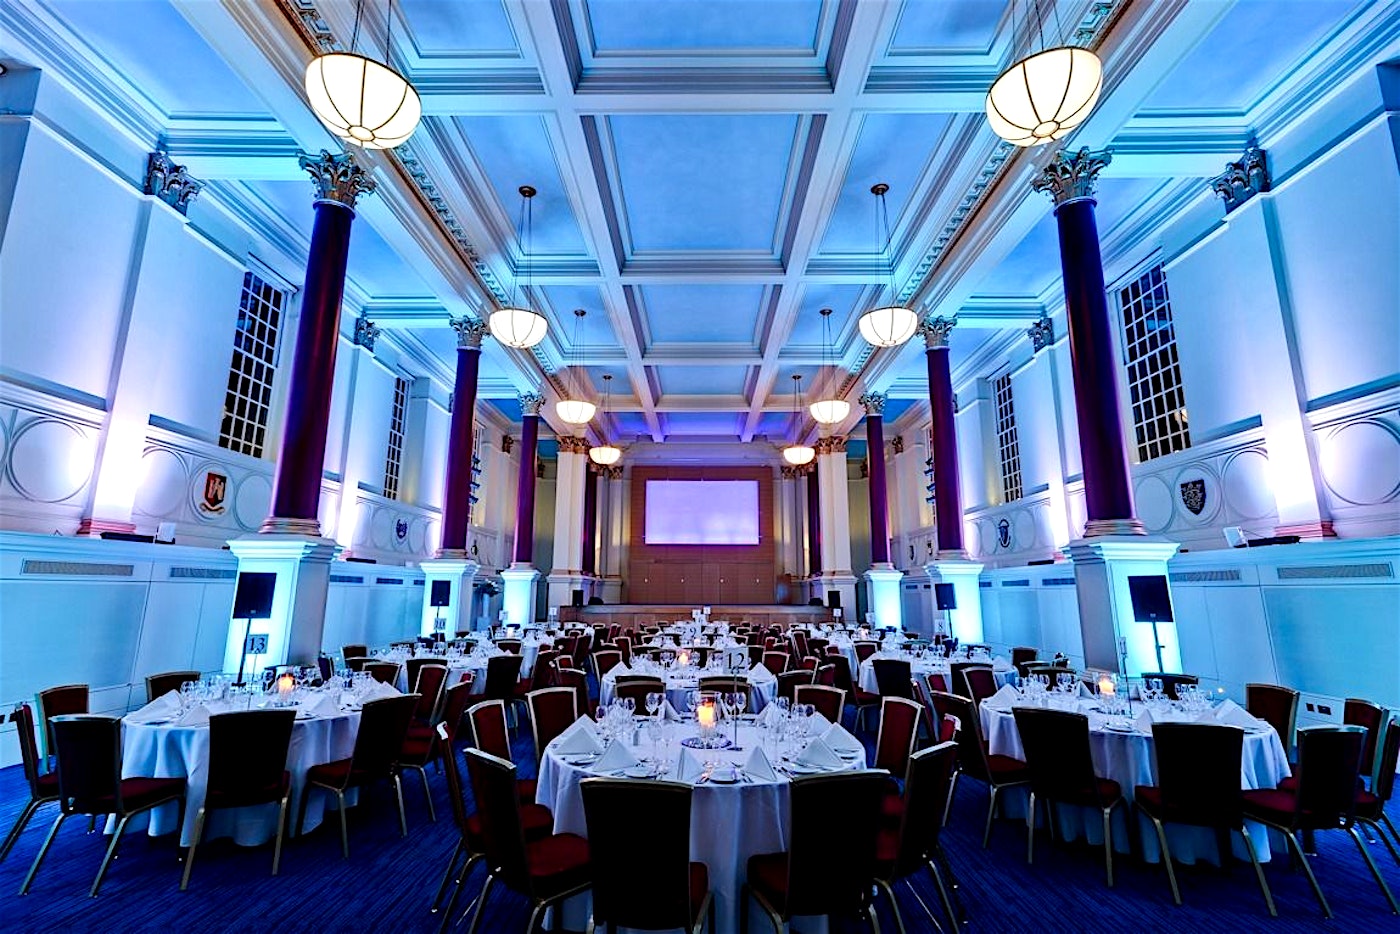 The Great Hall in the BMA House, London Halls